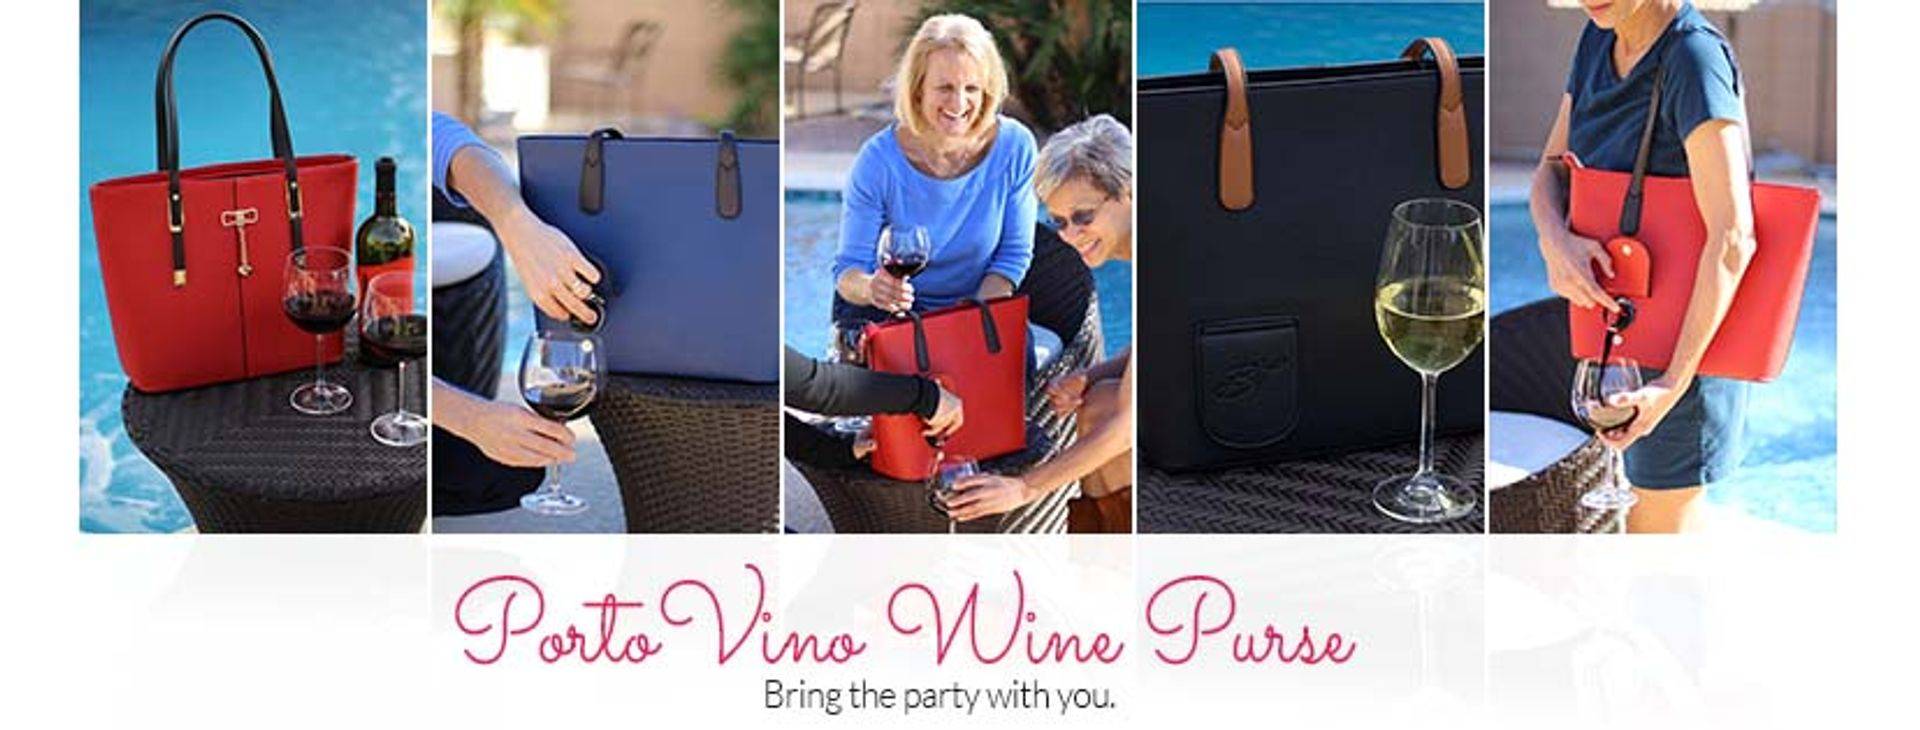 Buy PortoVino Tote bag - Vegan Leather Wine Purse with Hidden Spout and  Dispenser Flask for Wine Lovers that Holds and Pours 2 bottles of Wine!  Perfect for Traveling, Concerts, Bachelorette Party -